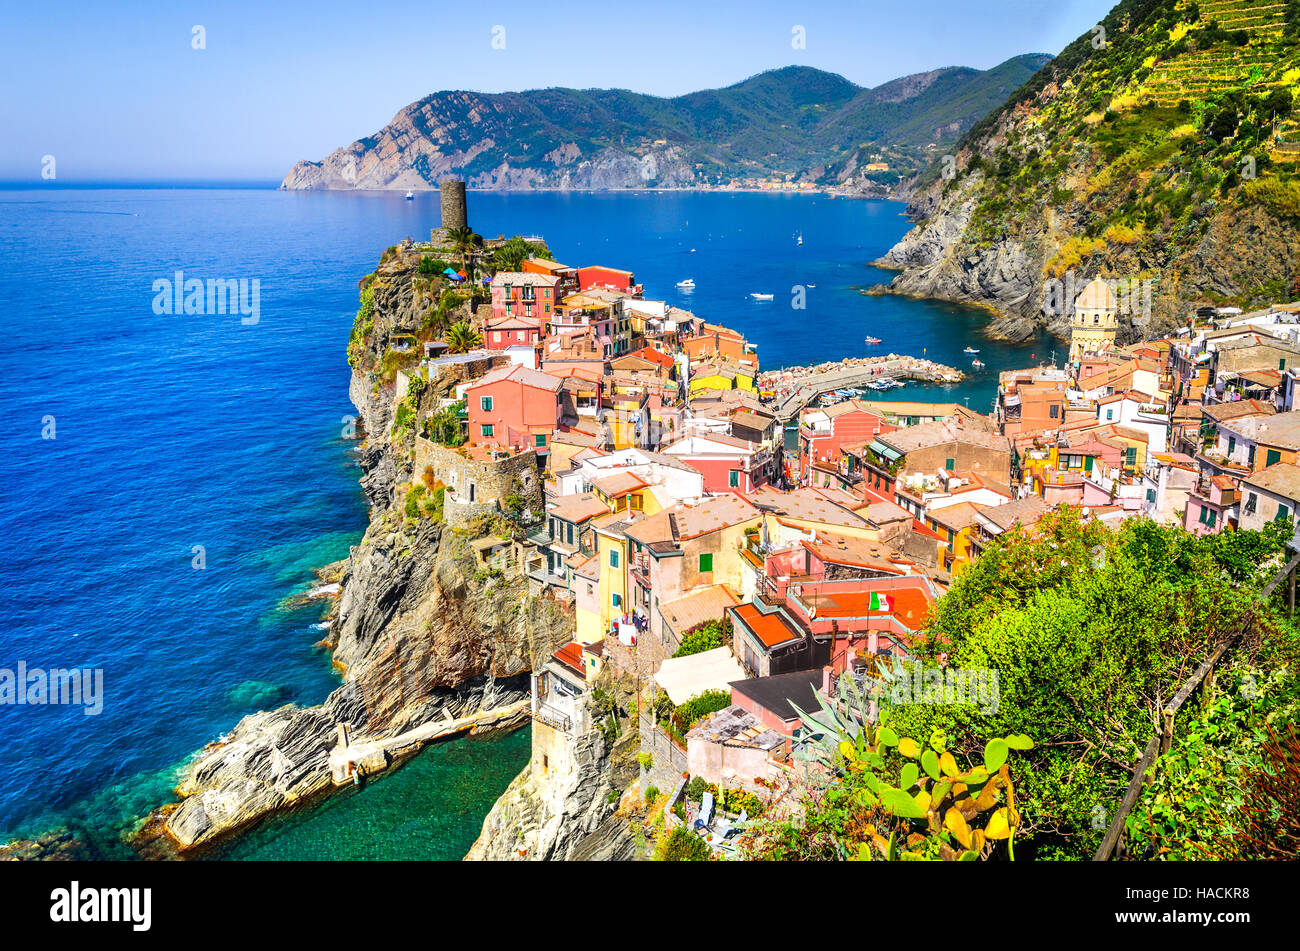 Vernazza, Cinque Terre. View from high hill of with houses and blue Mediterranean Sea, Cinque Terre national park, Liguria, Italy Stock Photo